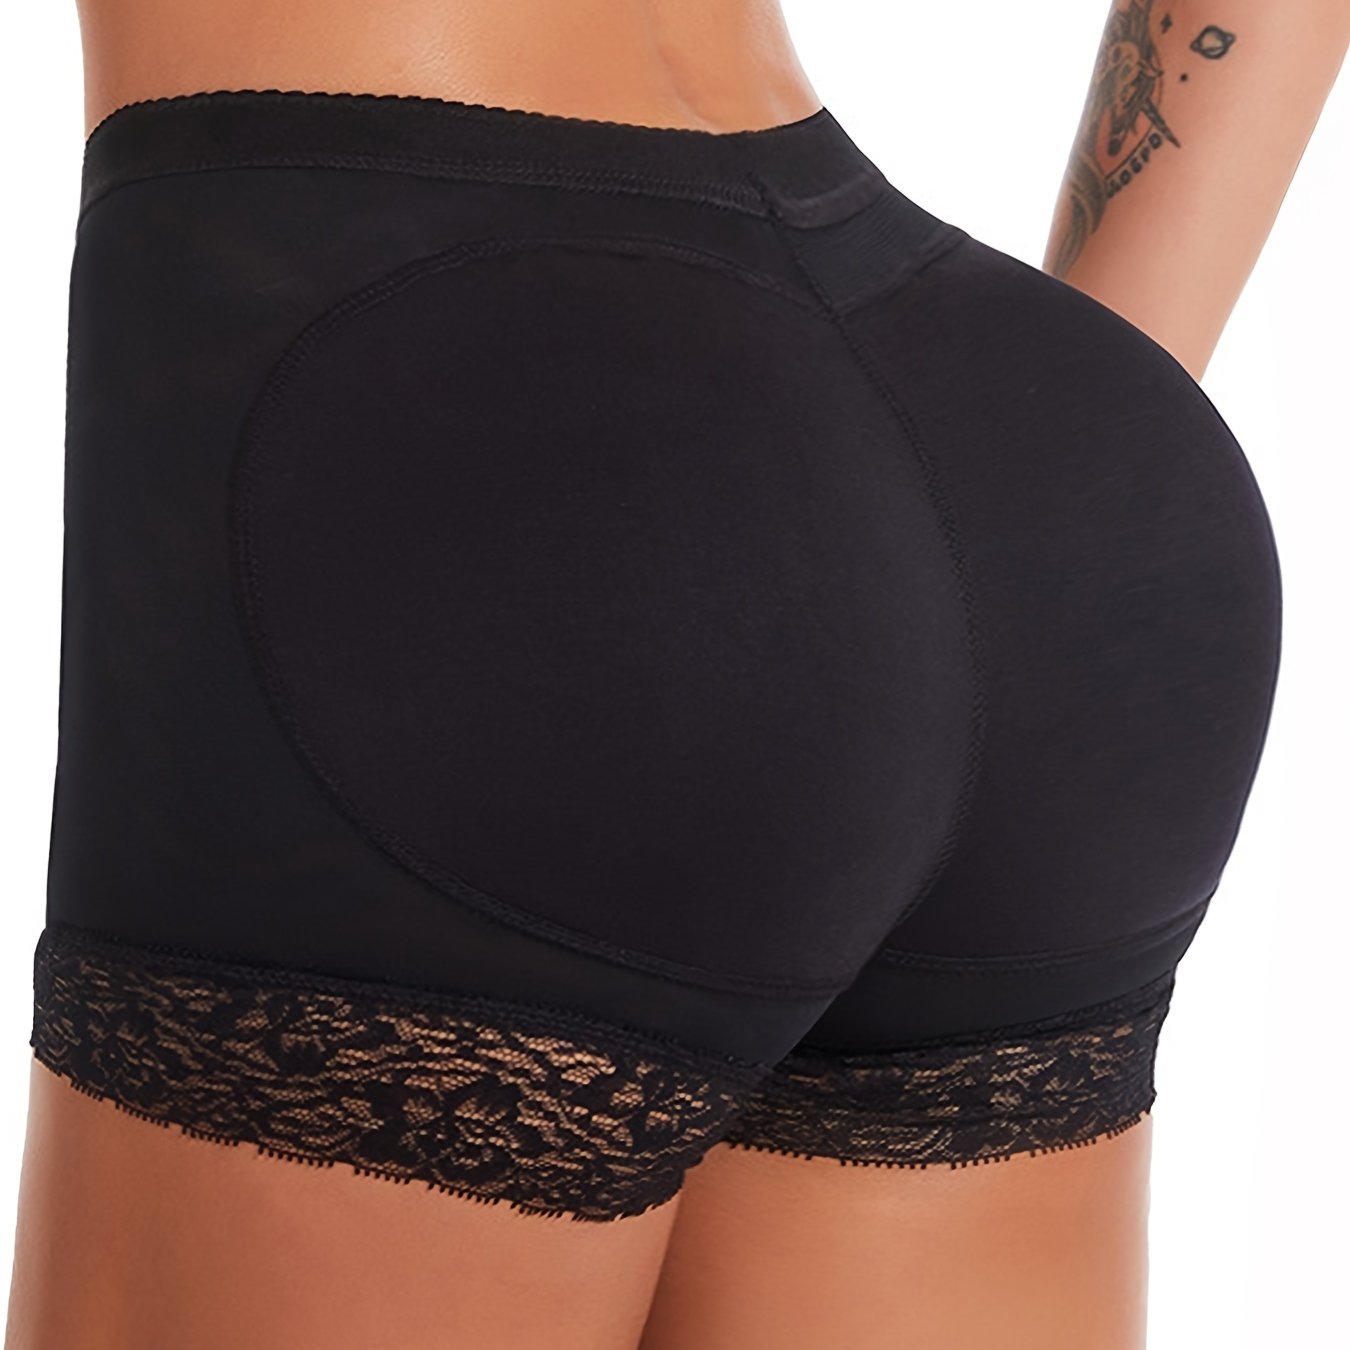 Find Cheap, Fashionable and Slimming butt hip enhancer shaper panties 